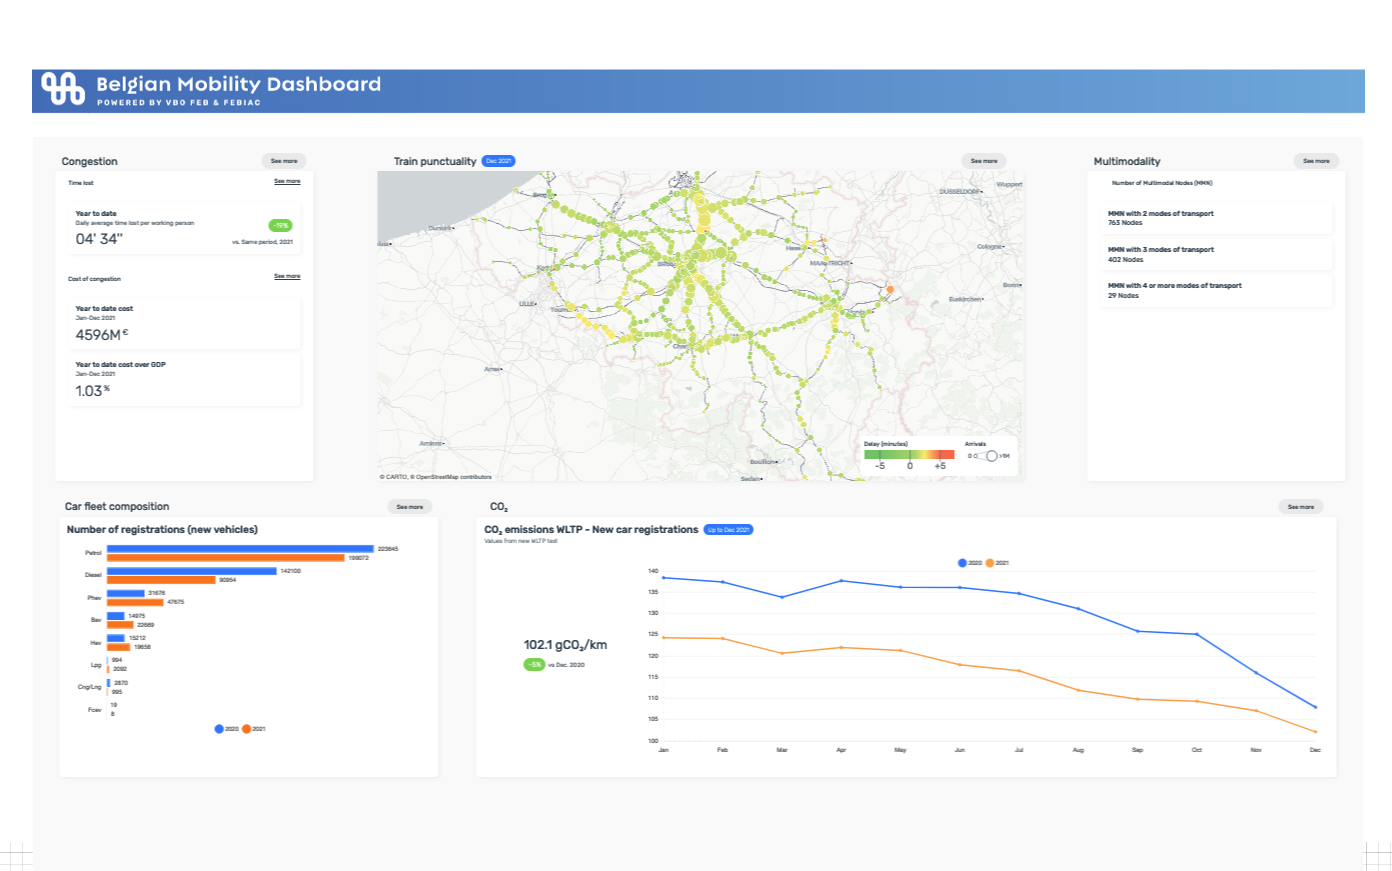 Belgian Mobility Dashboard shows how country evolves